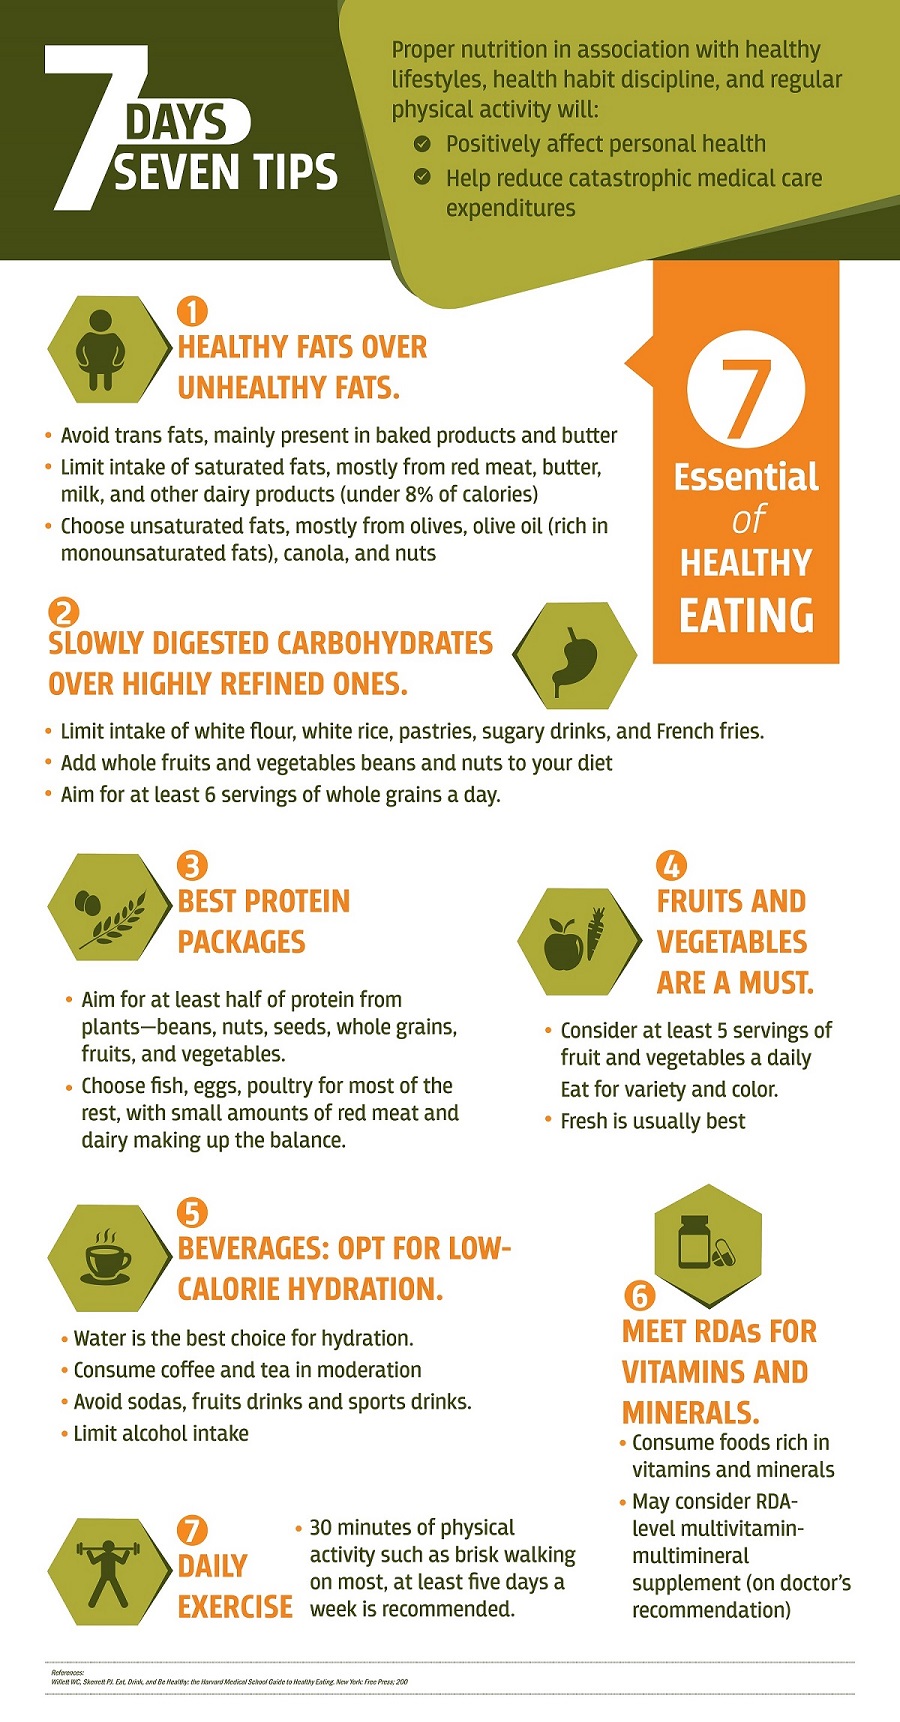 Seven essential of healthy eating